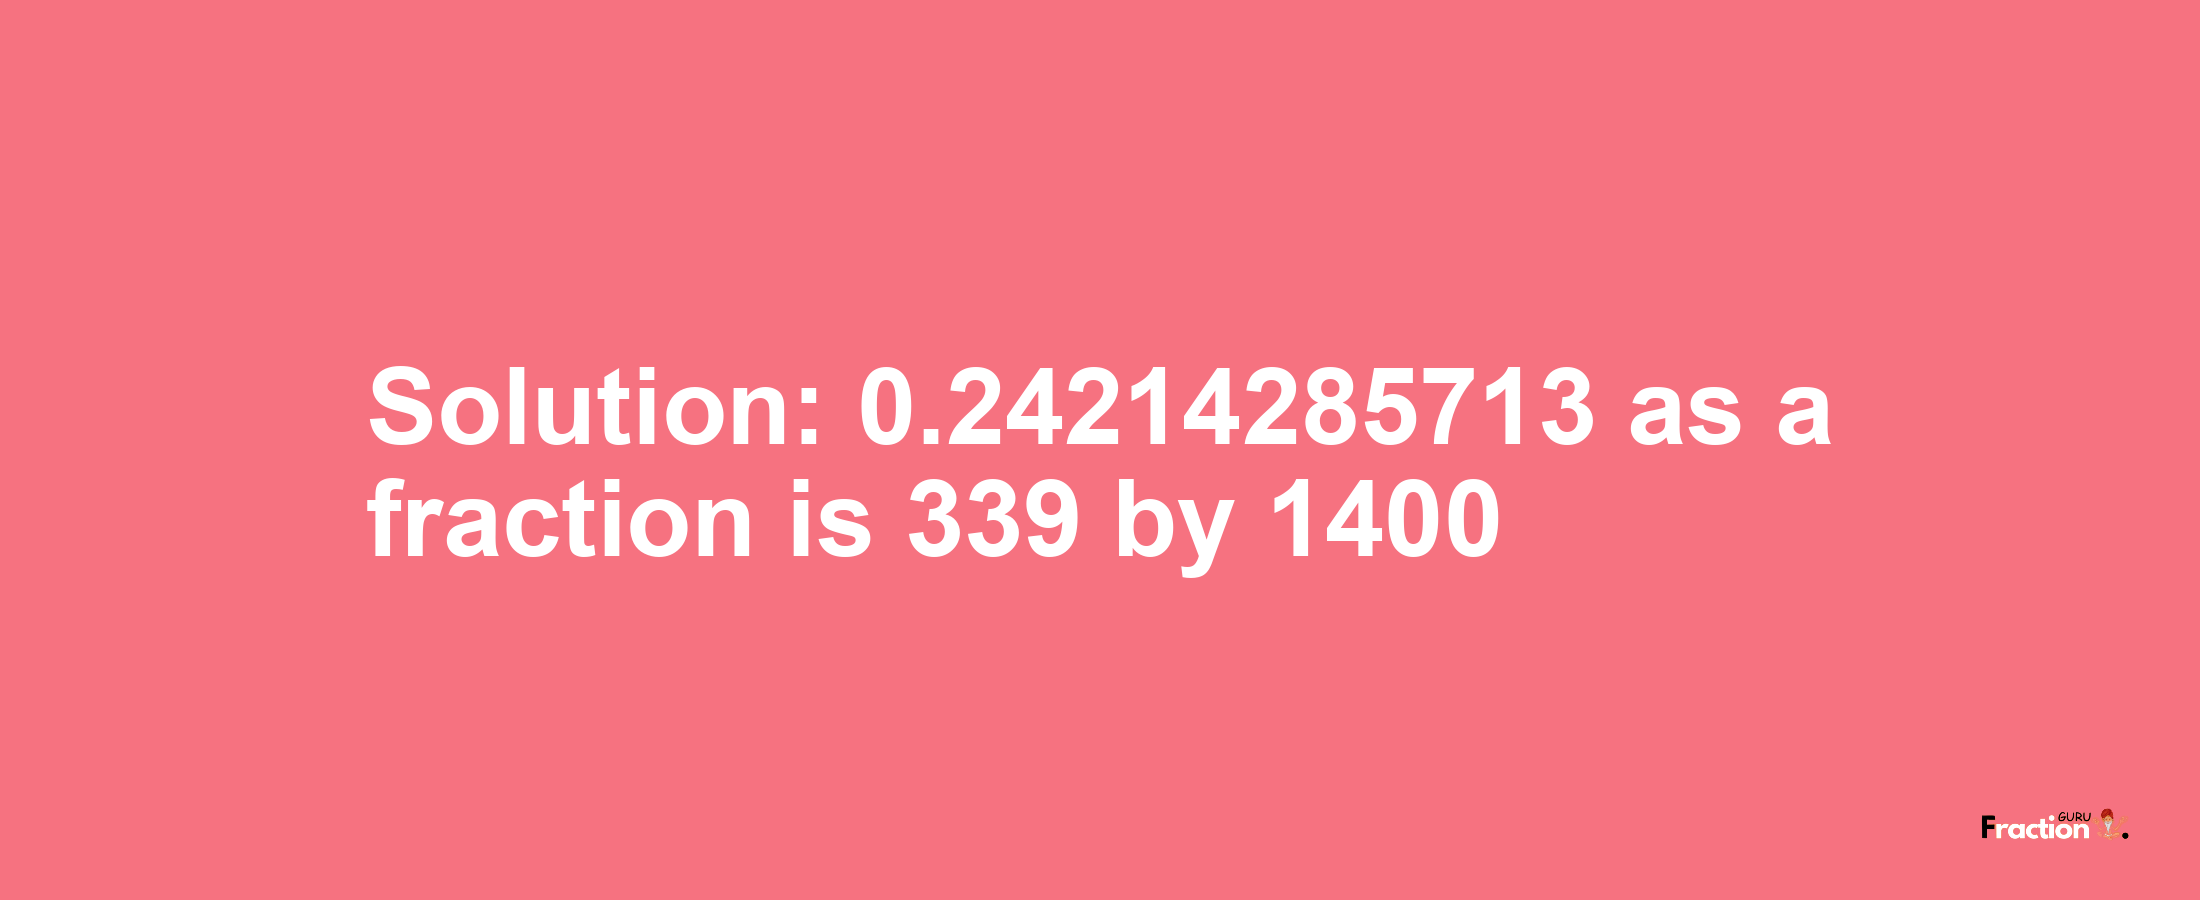 Solution:0.24214285713 as a fraction is 339/1400